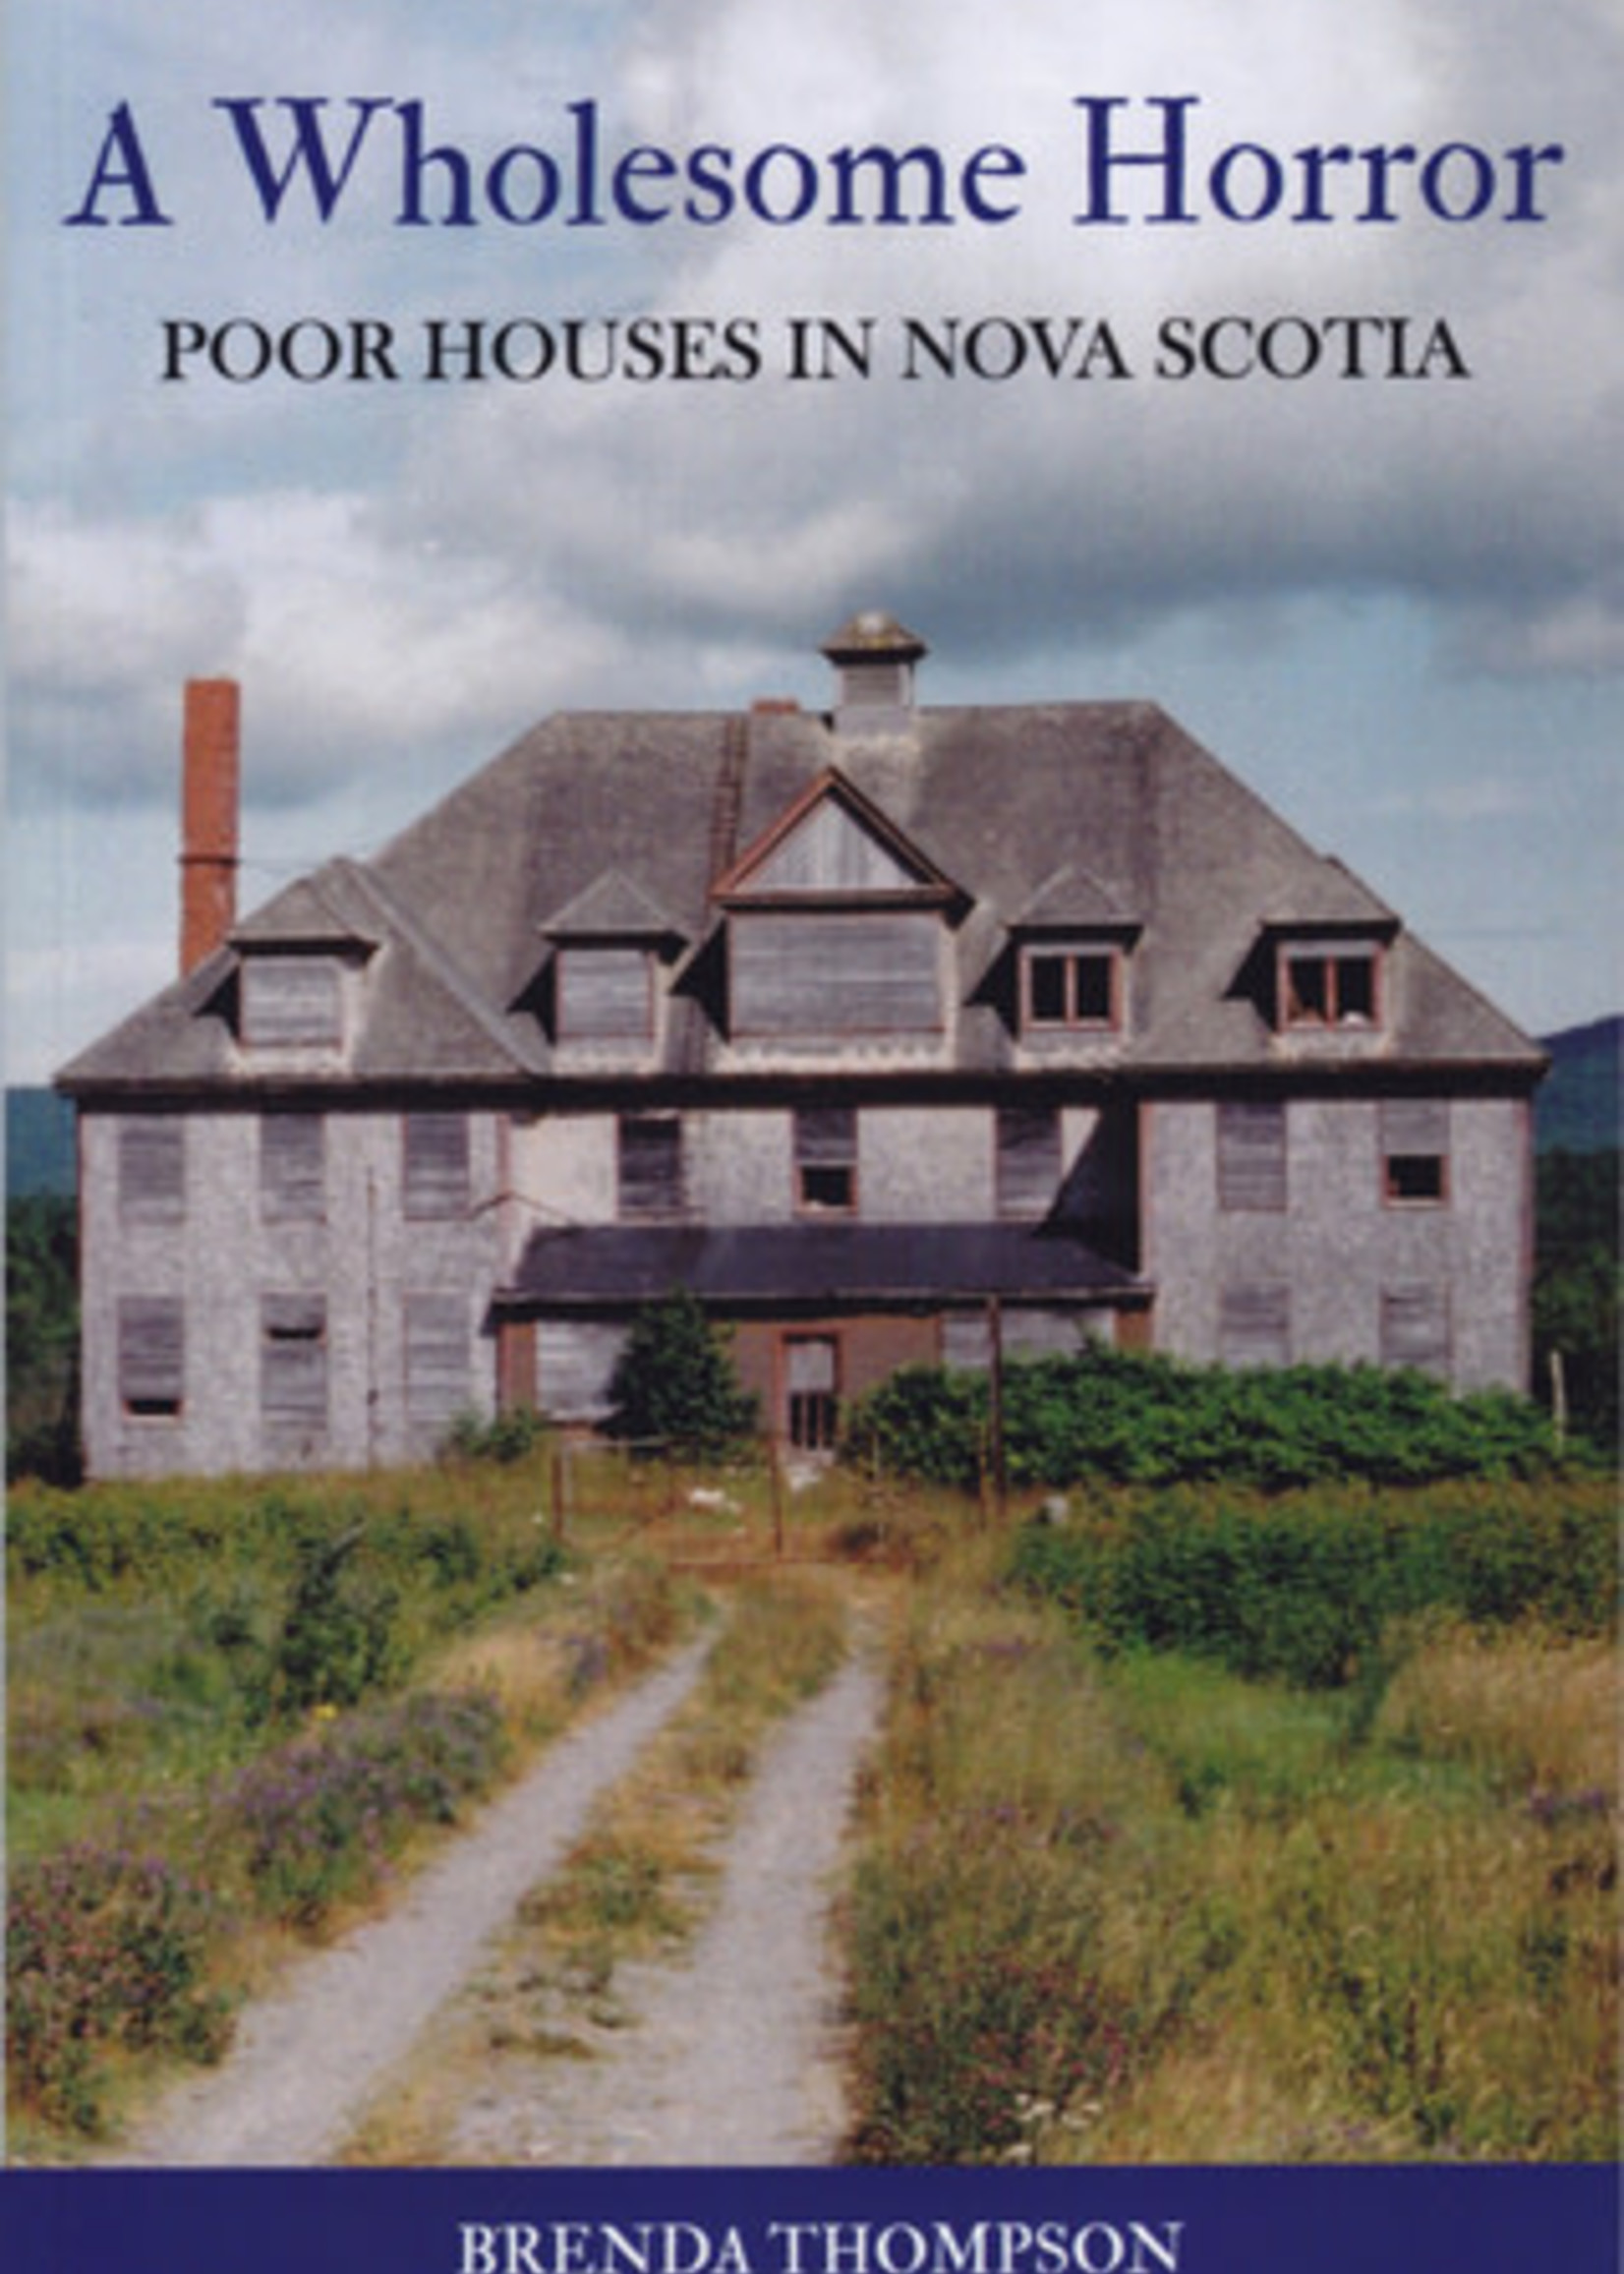 A Wholesome Horror: Poor Houses in Nova Scotia by Brenda Thompson